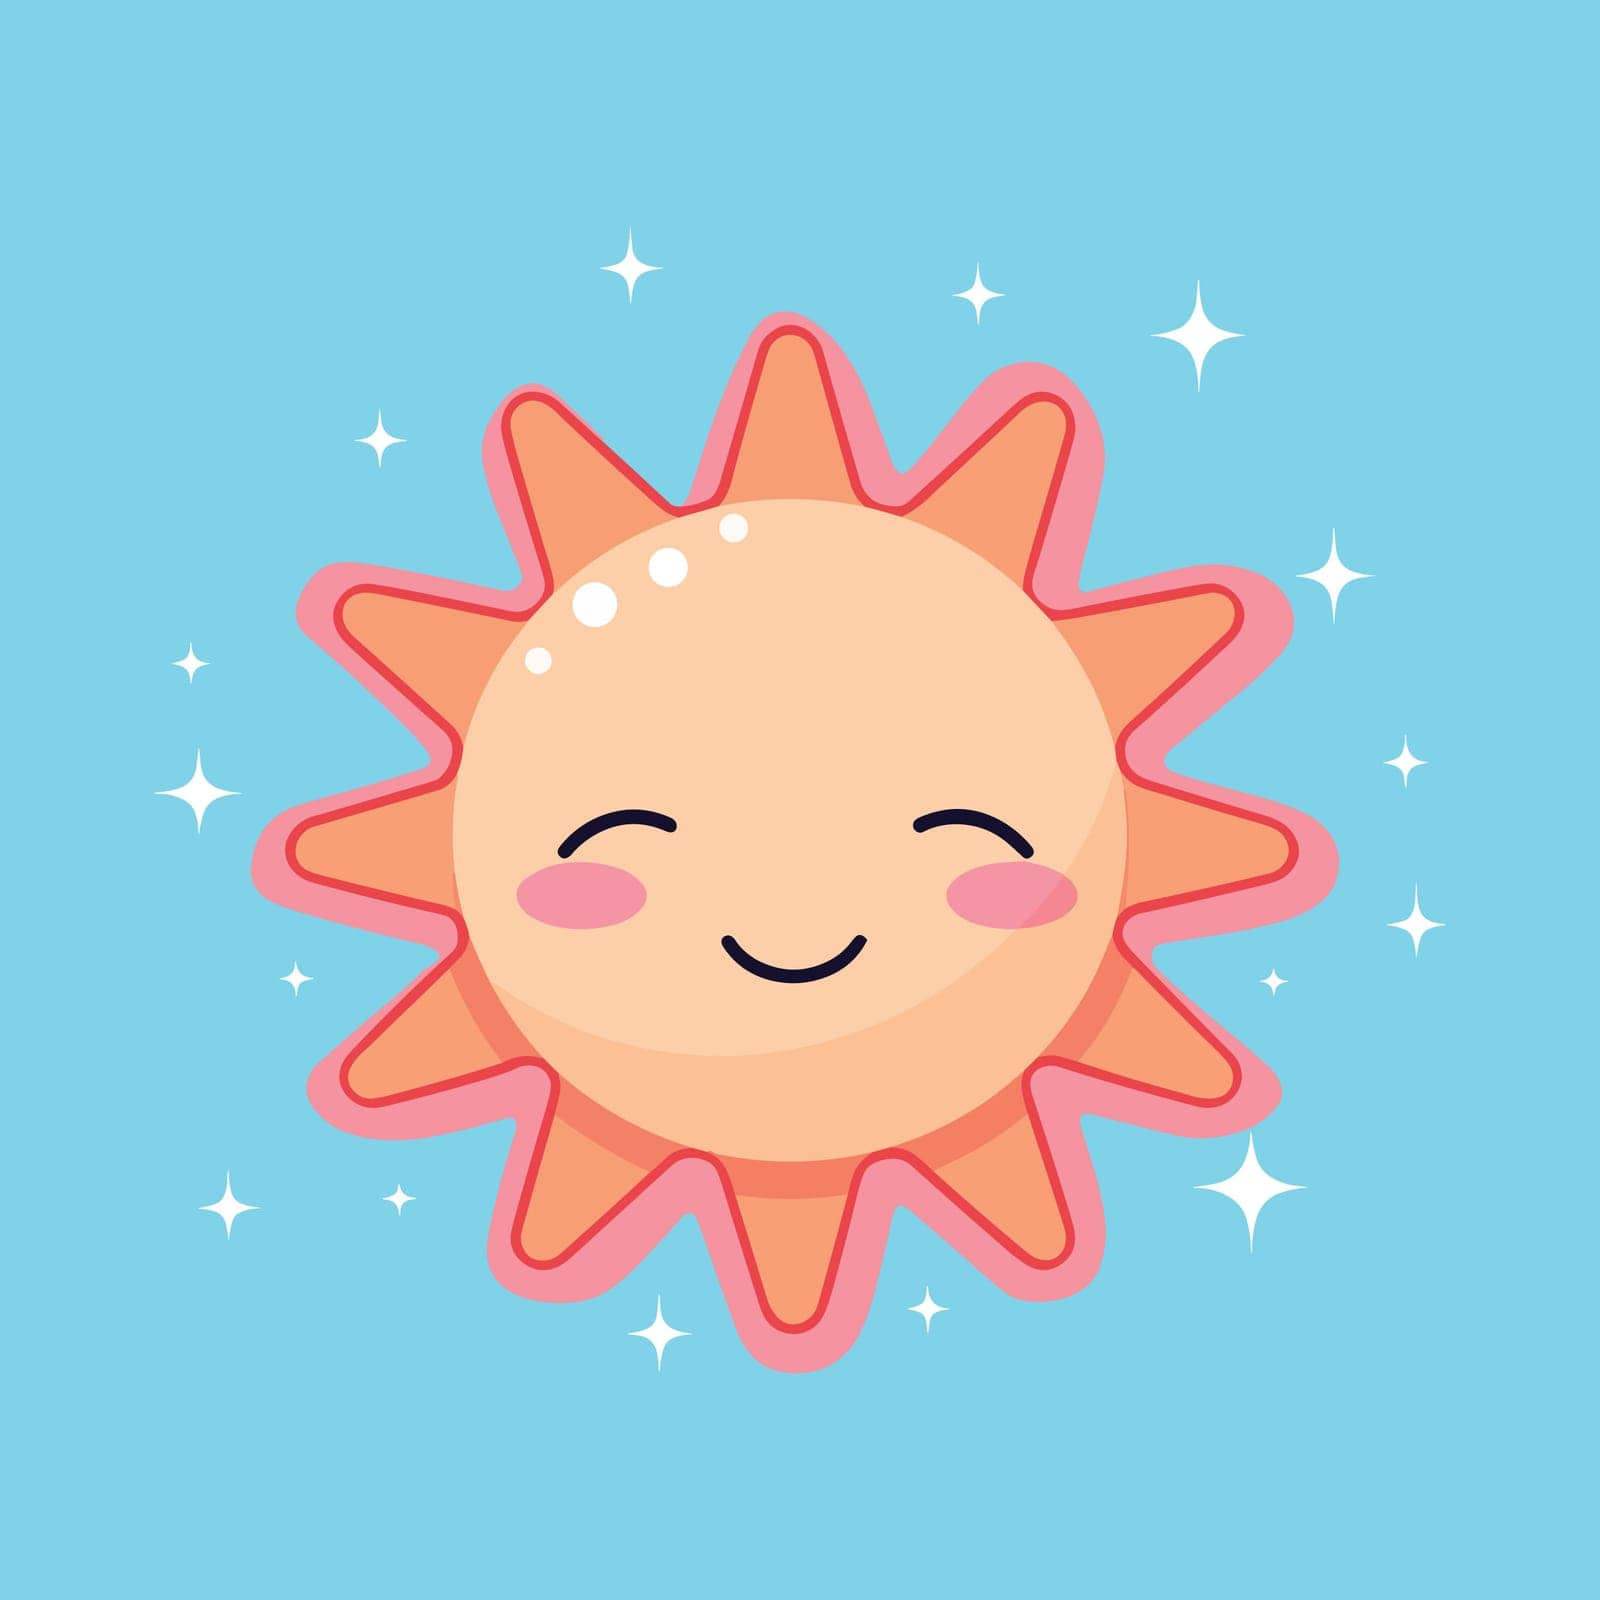 Cute sun in boho style in pastel colors by Vinhsino